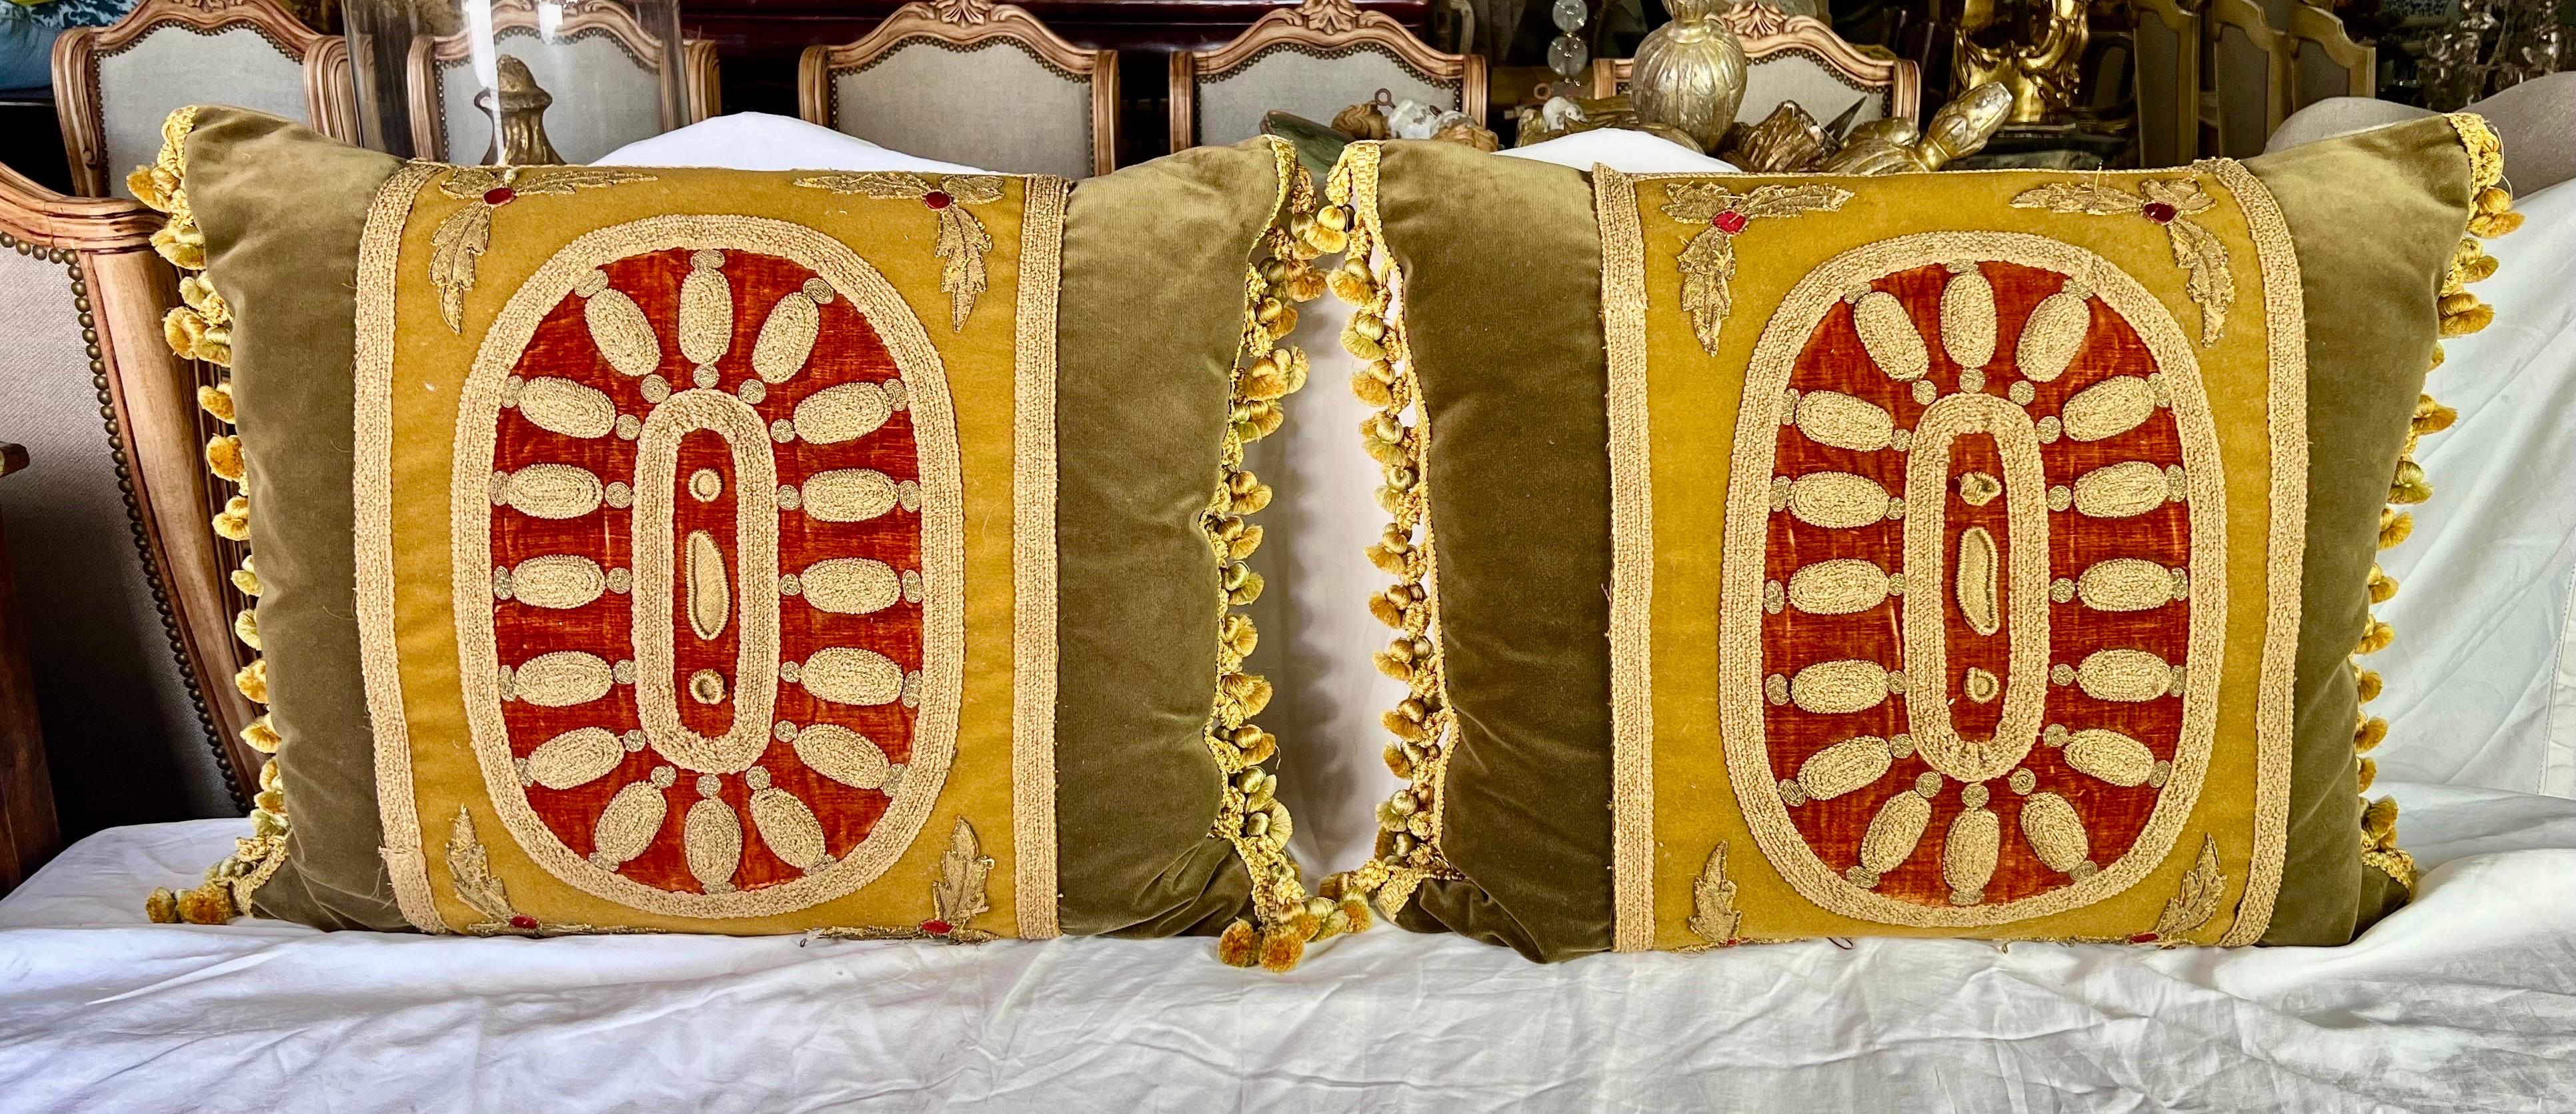 This pair of pillows with 19th-century metallic embroidery on golden velvet, set against a burnt orange background, exude a touch of opulence.  The oval design, green velvet, and multicolored fringe details add to their richness.  Down-filled